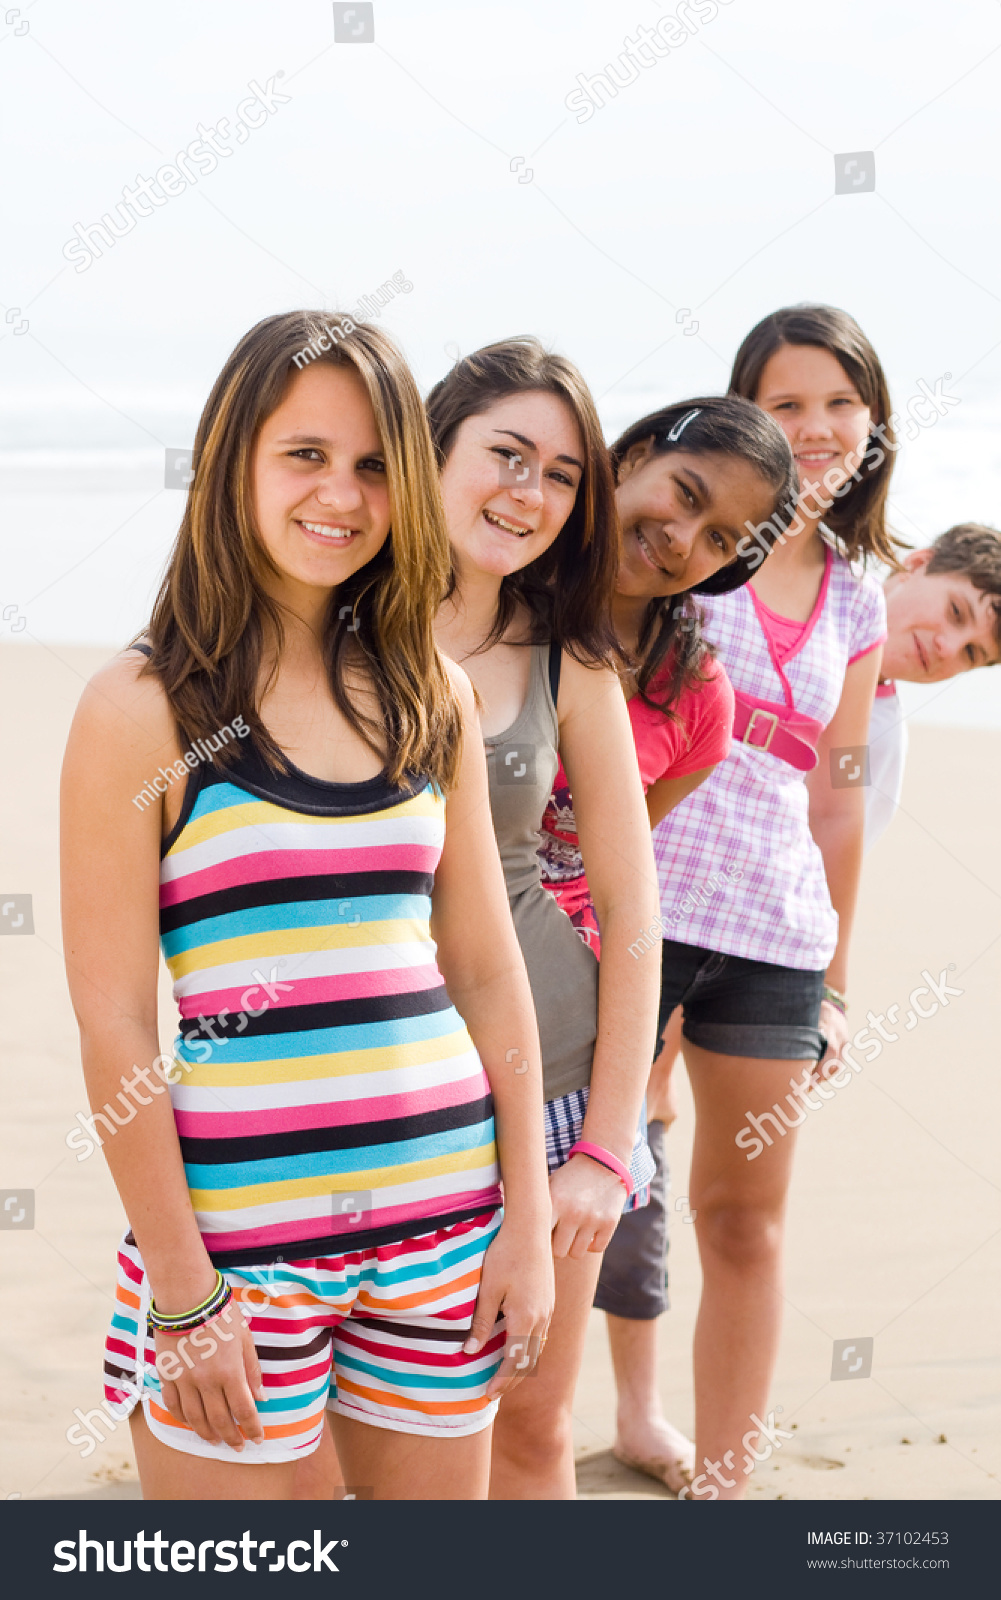 Group Of Young Teen On Beach Stock Photo 37102453 : Shutterstock